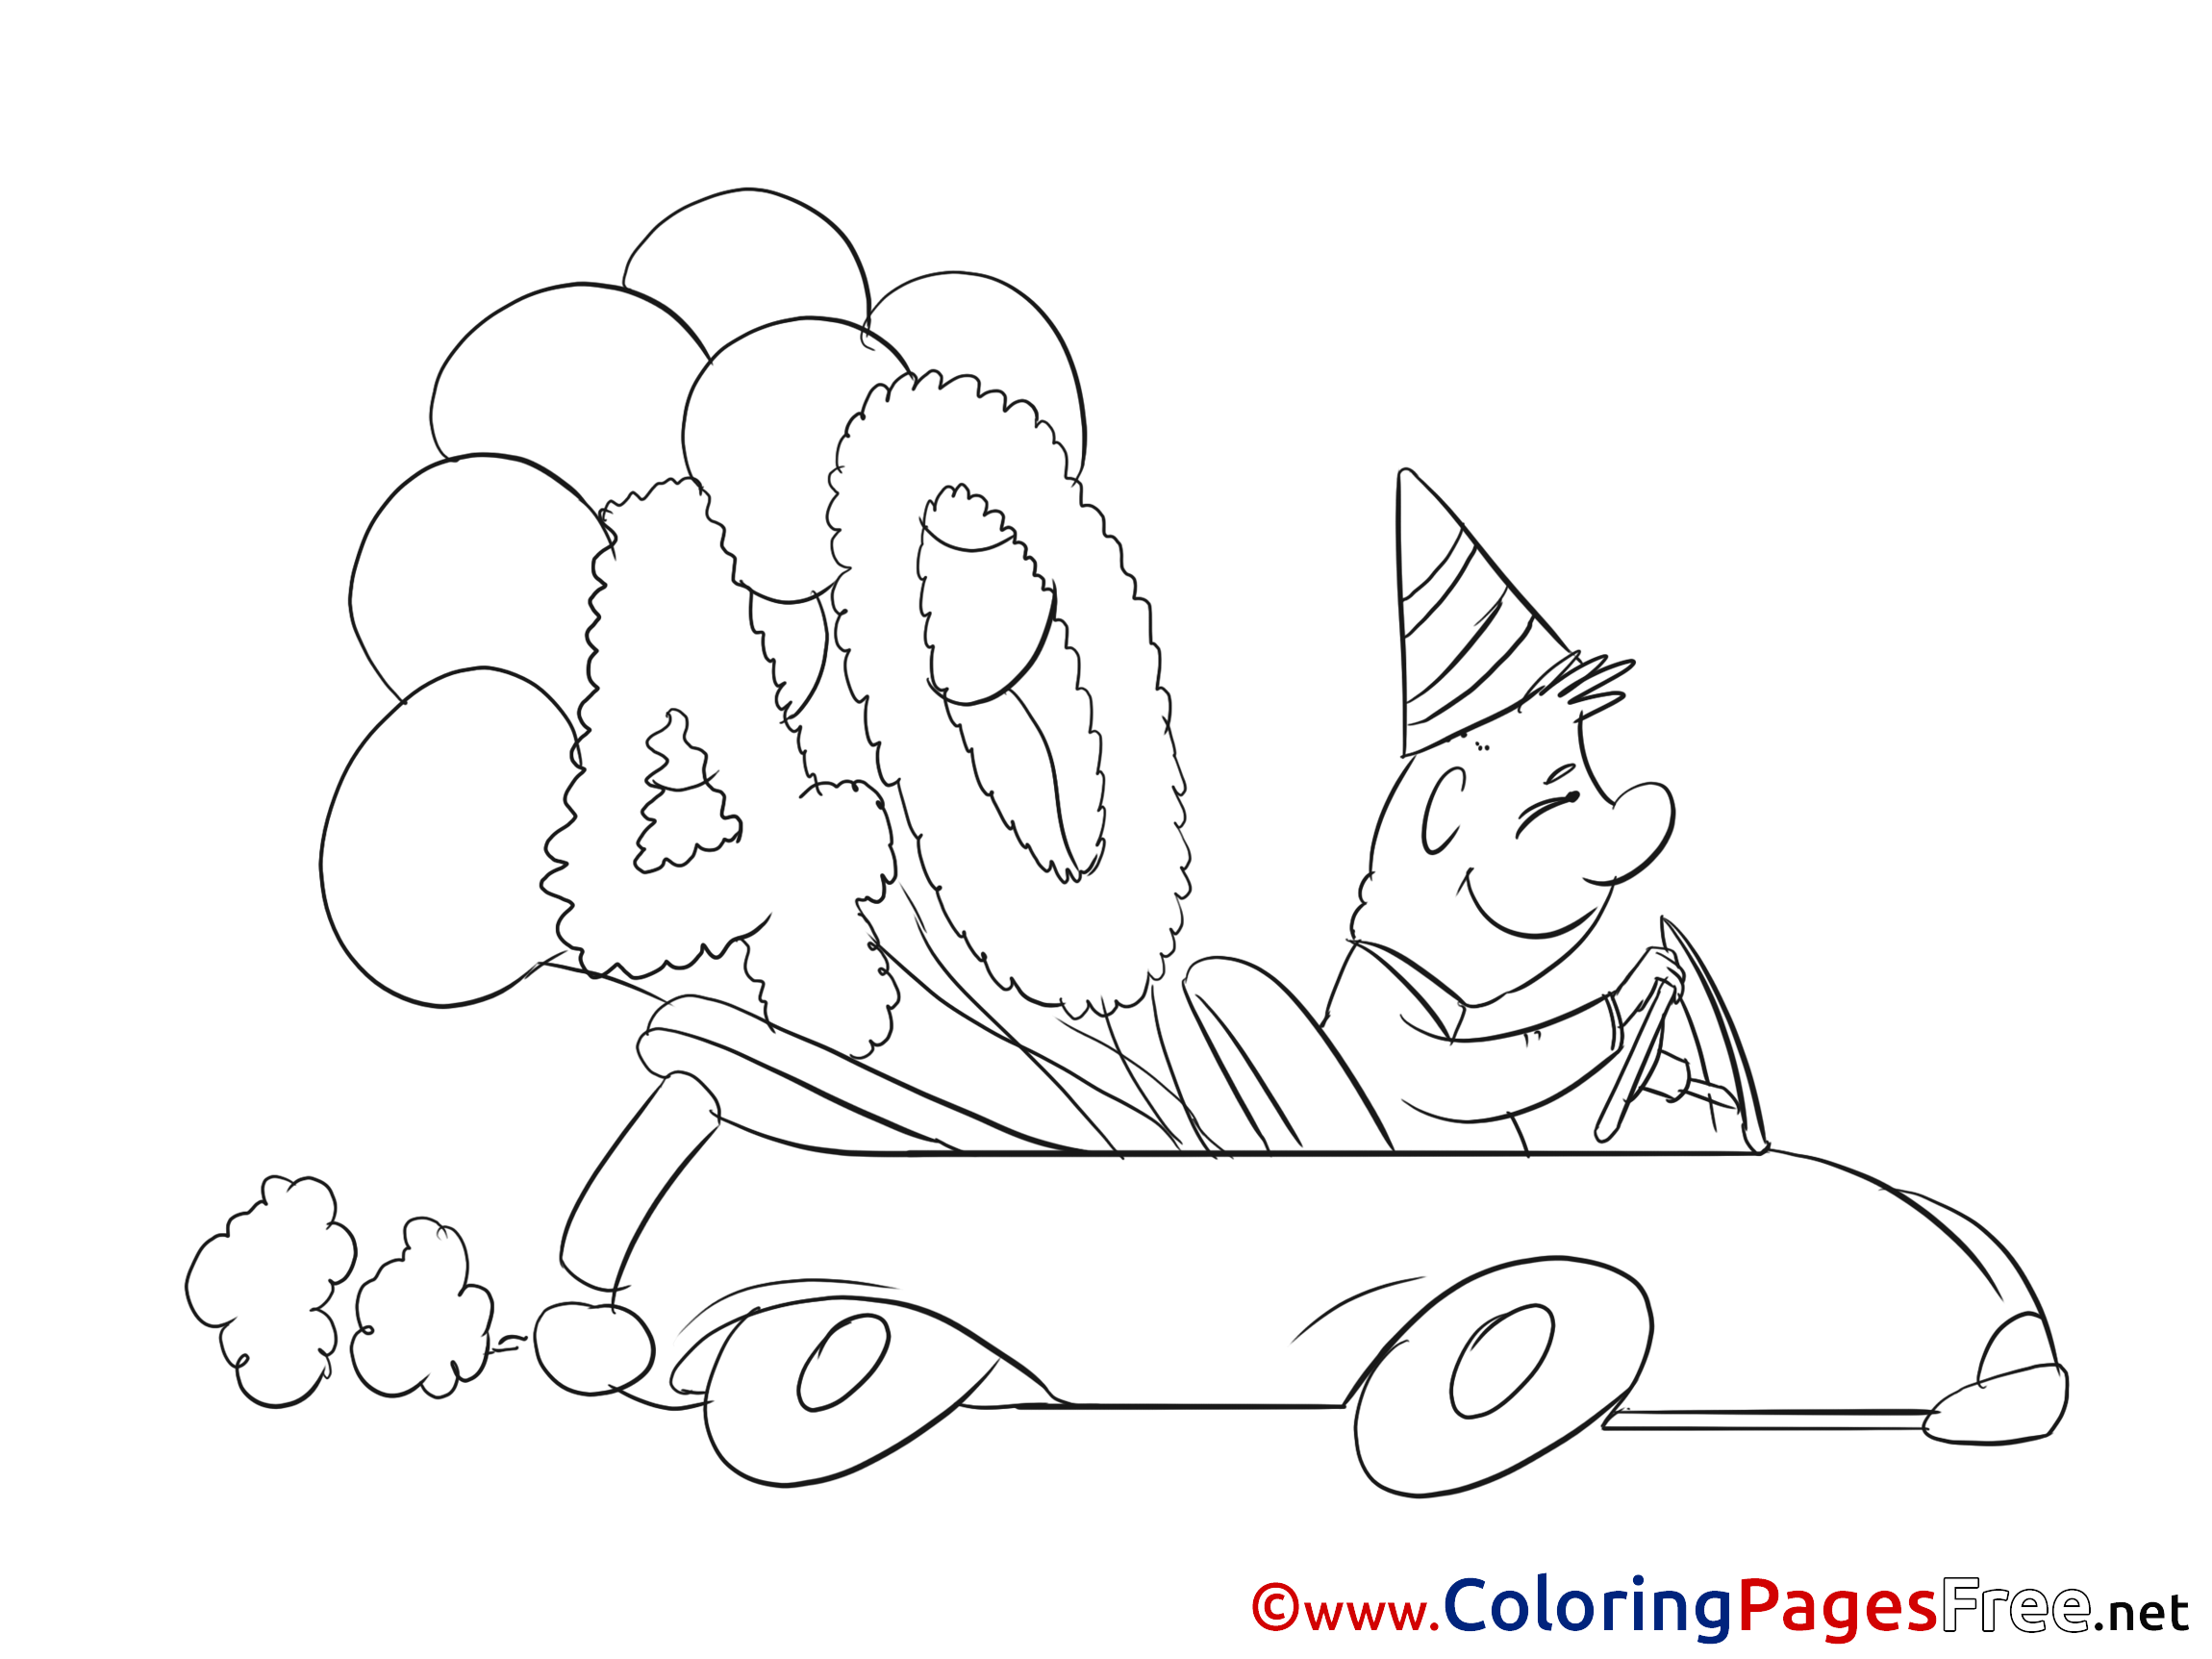 40 Years free Colouring Page Birthday